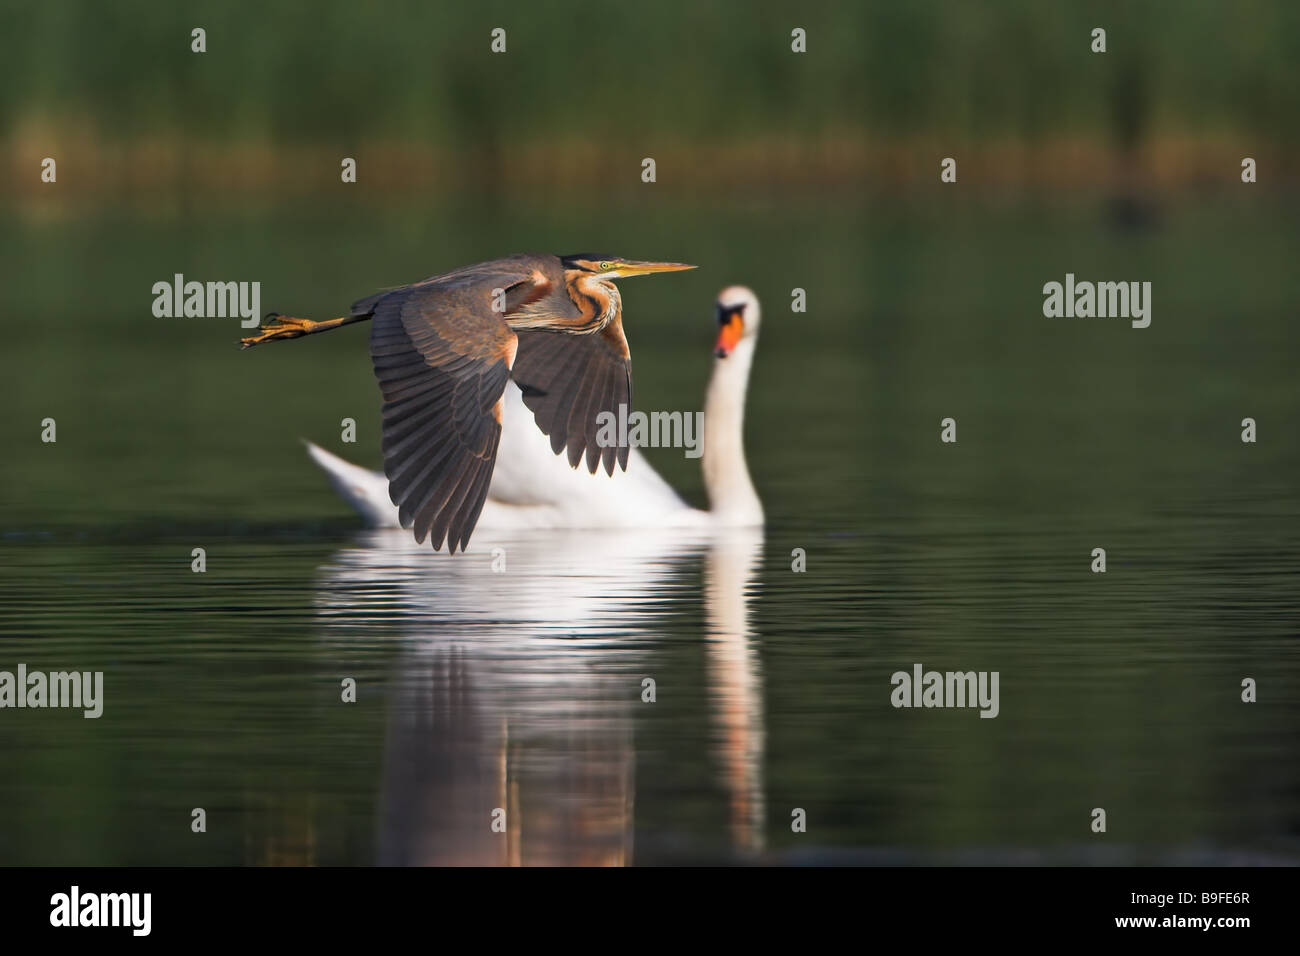 Heron flying over river with swan in background Stock Photo